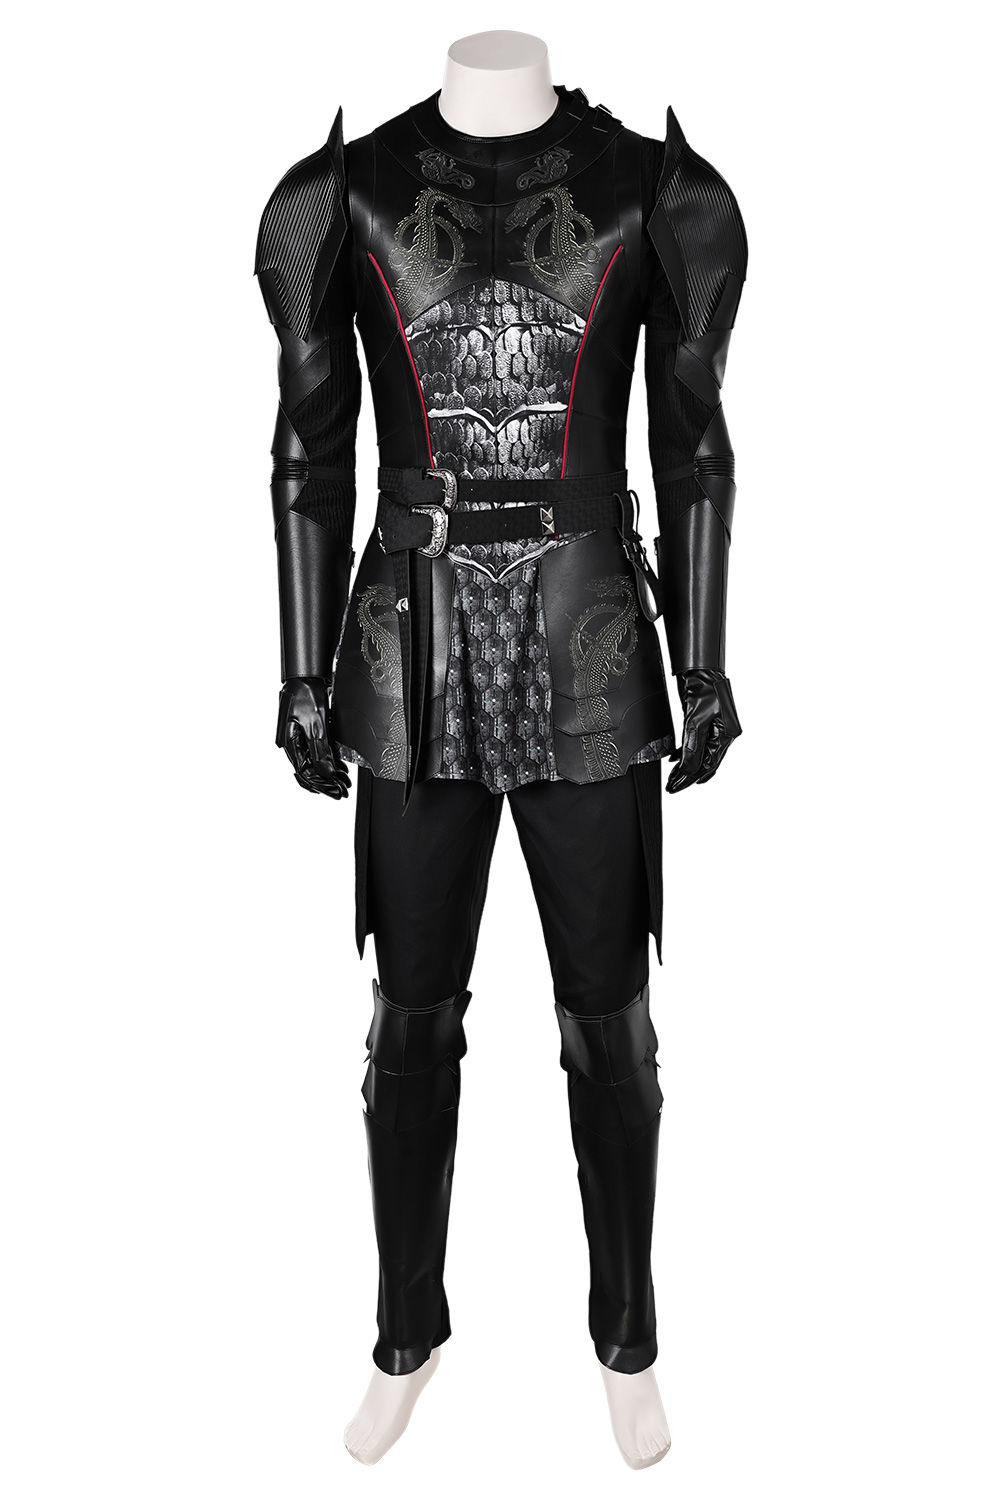 TV House of the Dragon Season 2 Daemon Targaryen Leather Outfits Halloween Carnival Suit Cosplay Costume